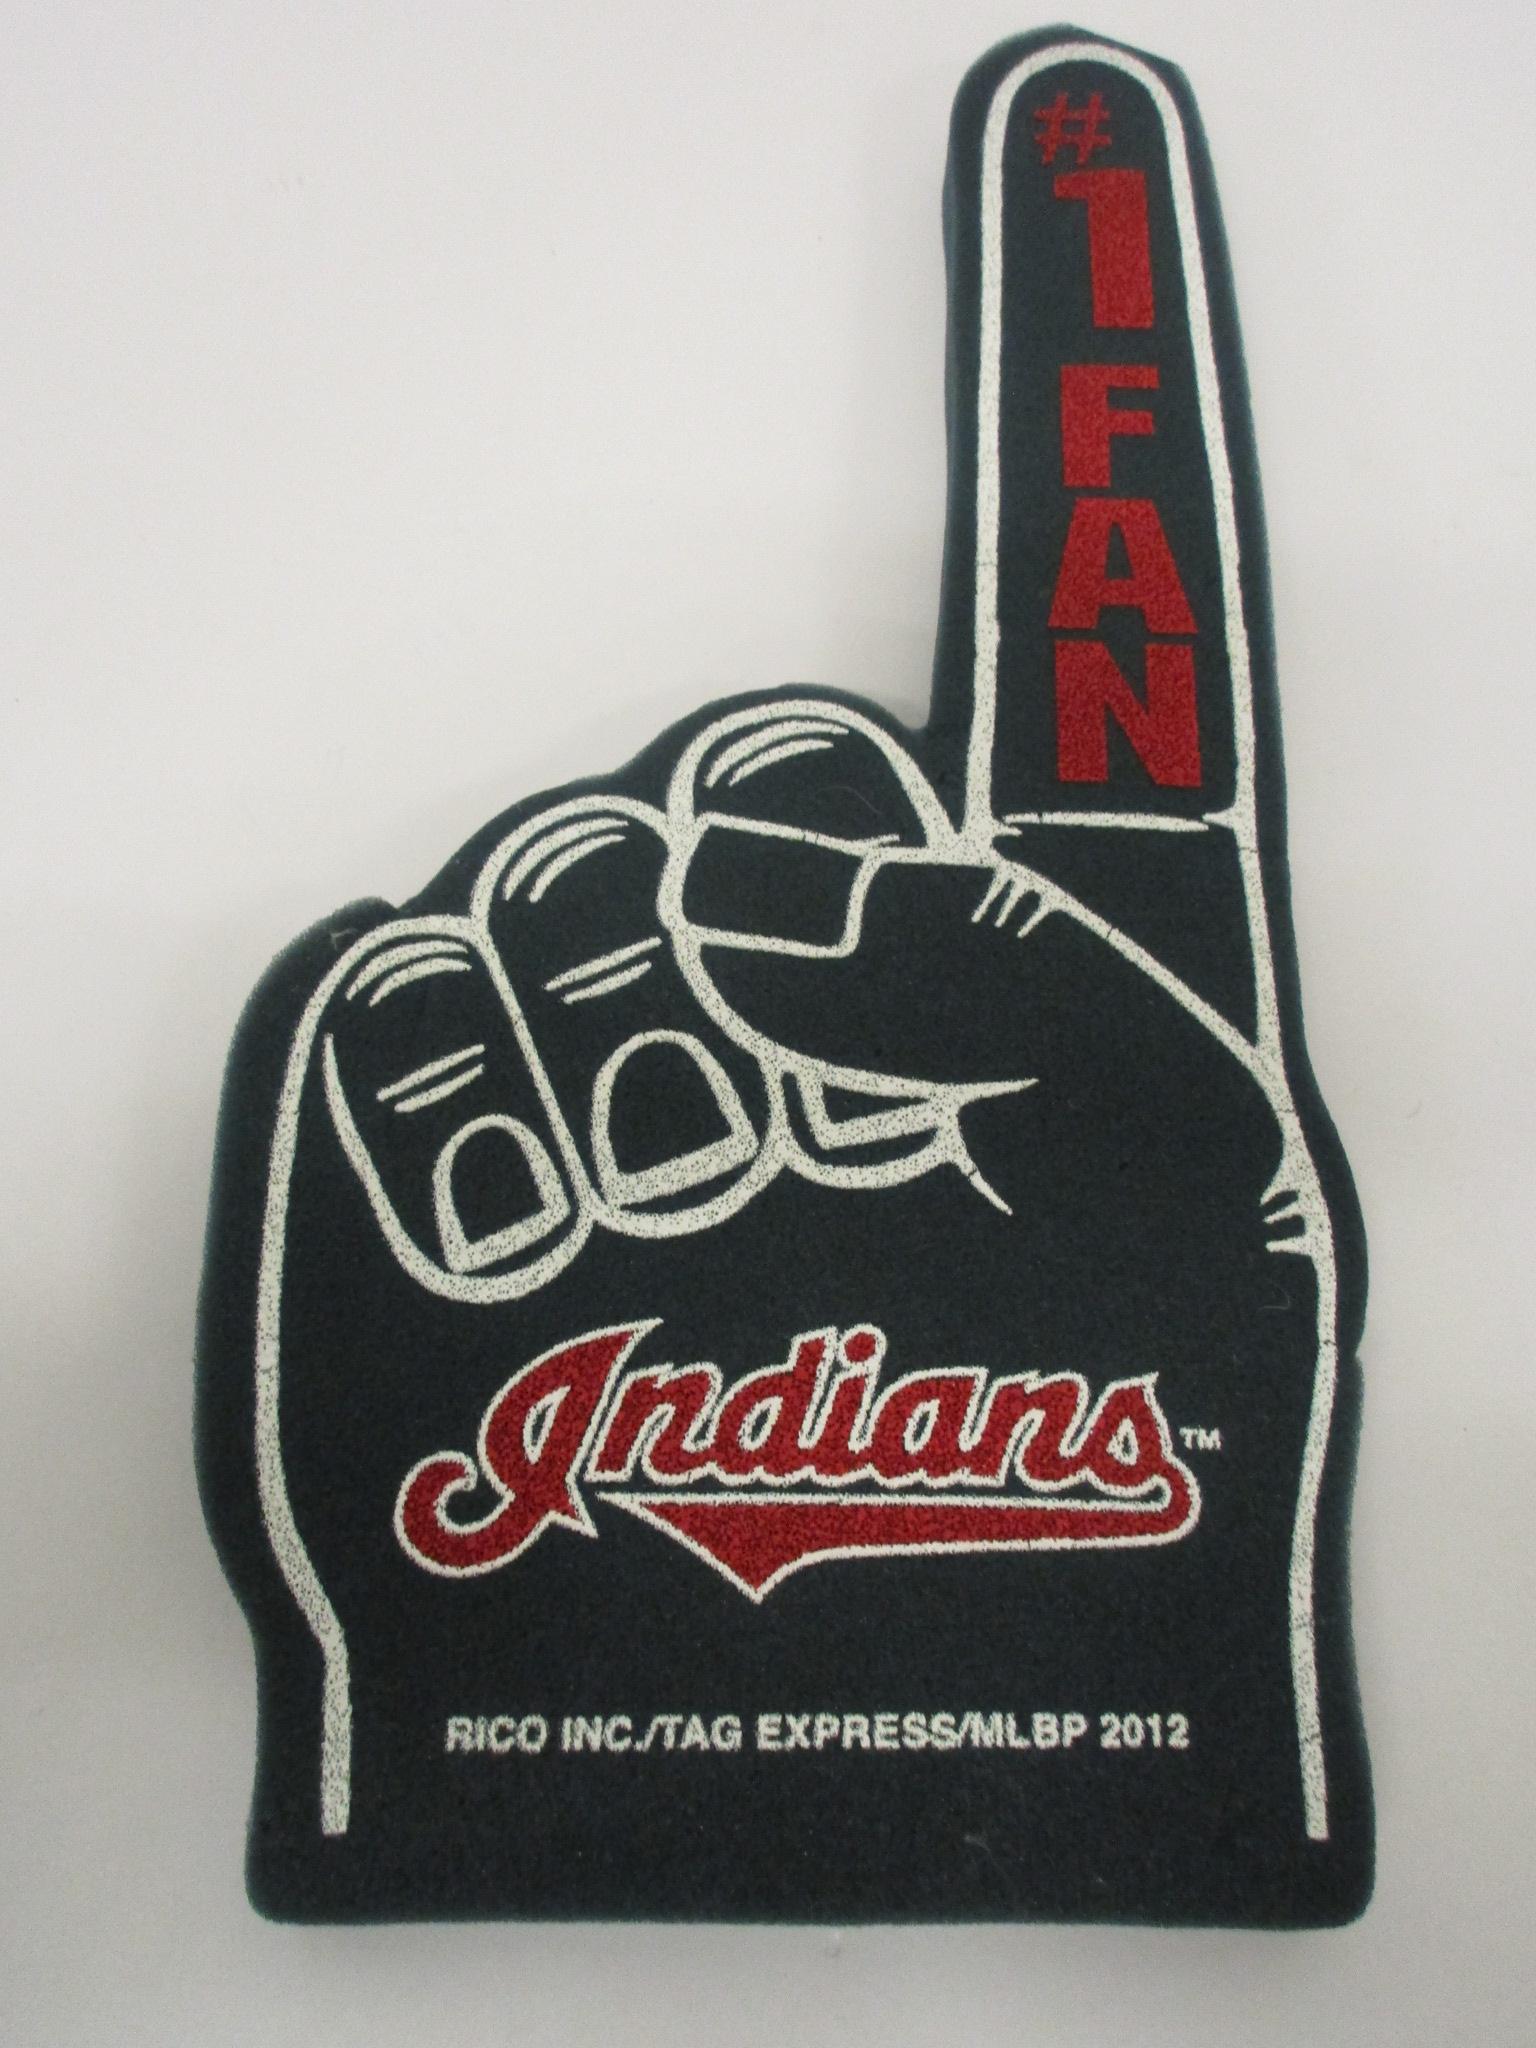 Cleveland Indians Chief Wahoo rally foam finger  2012 Rico Industries